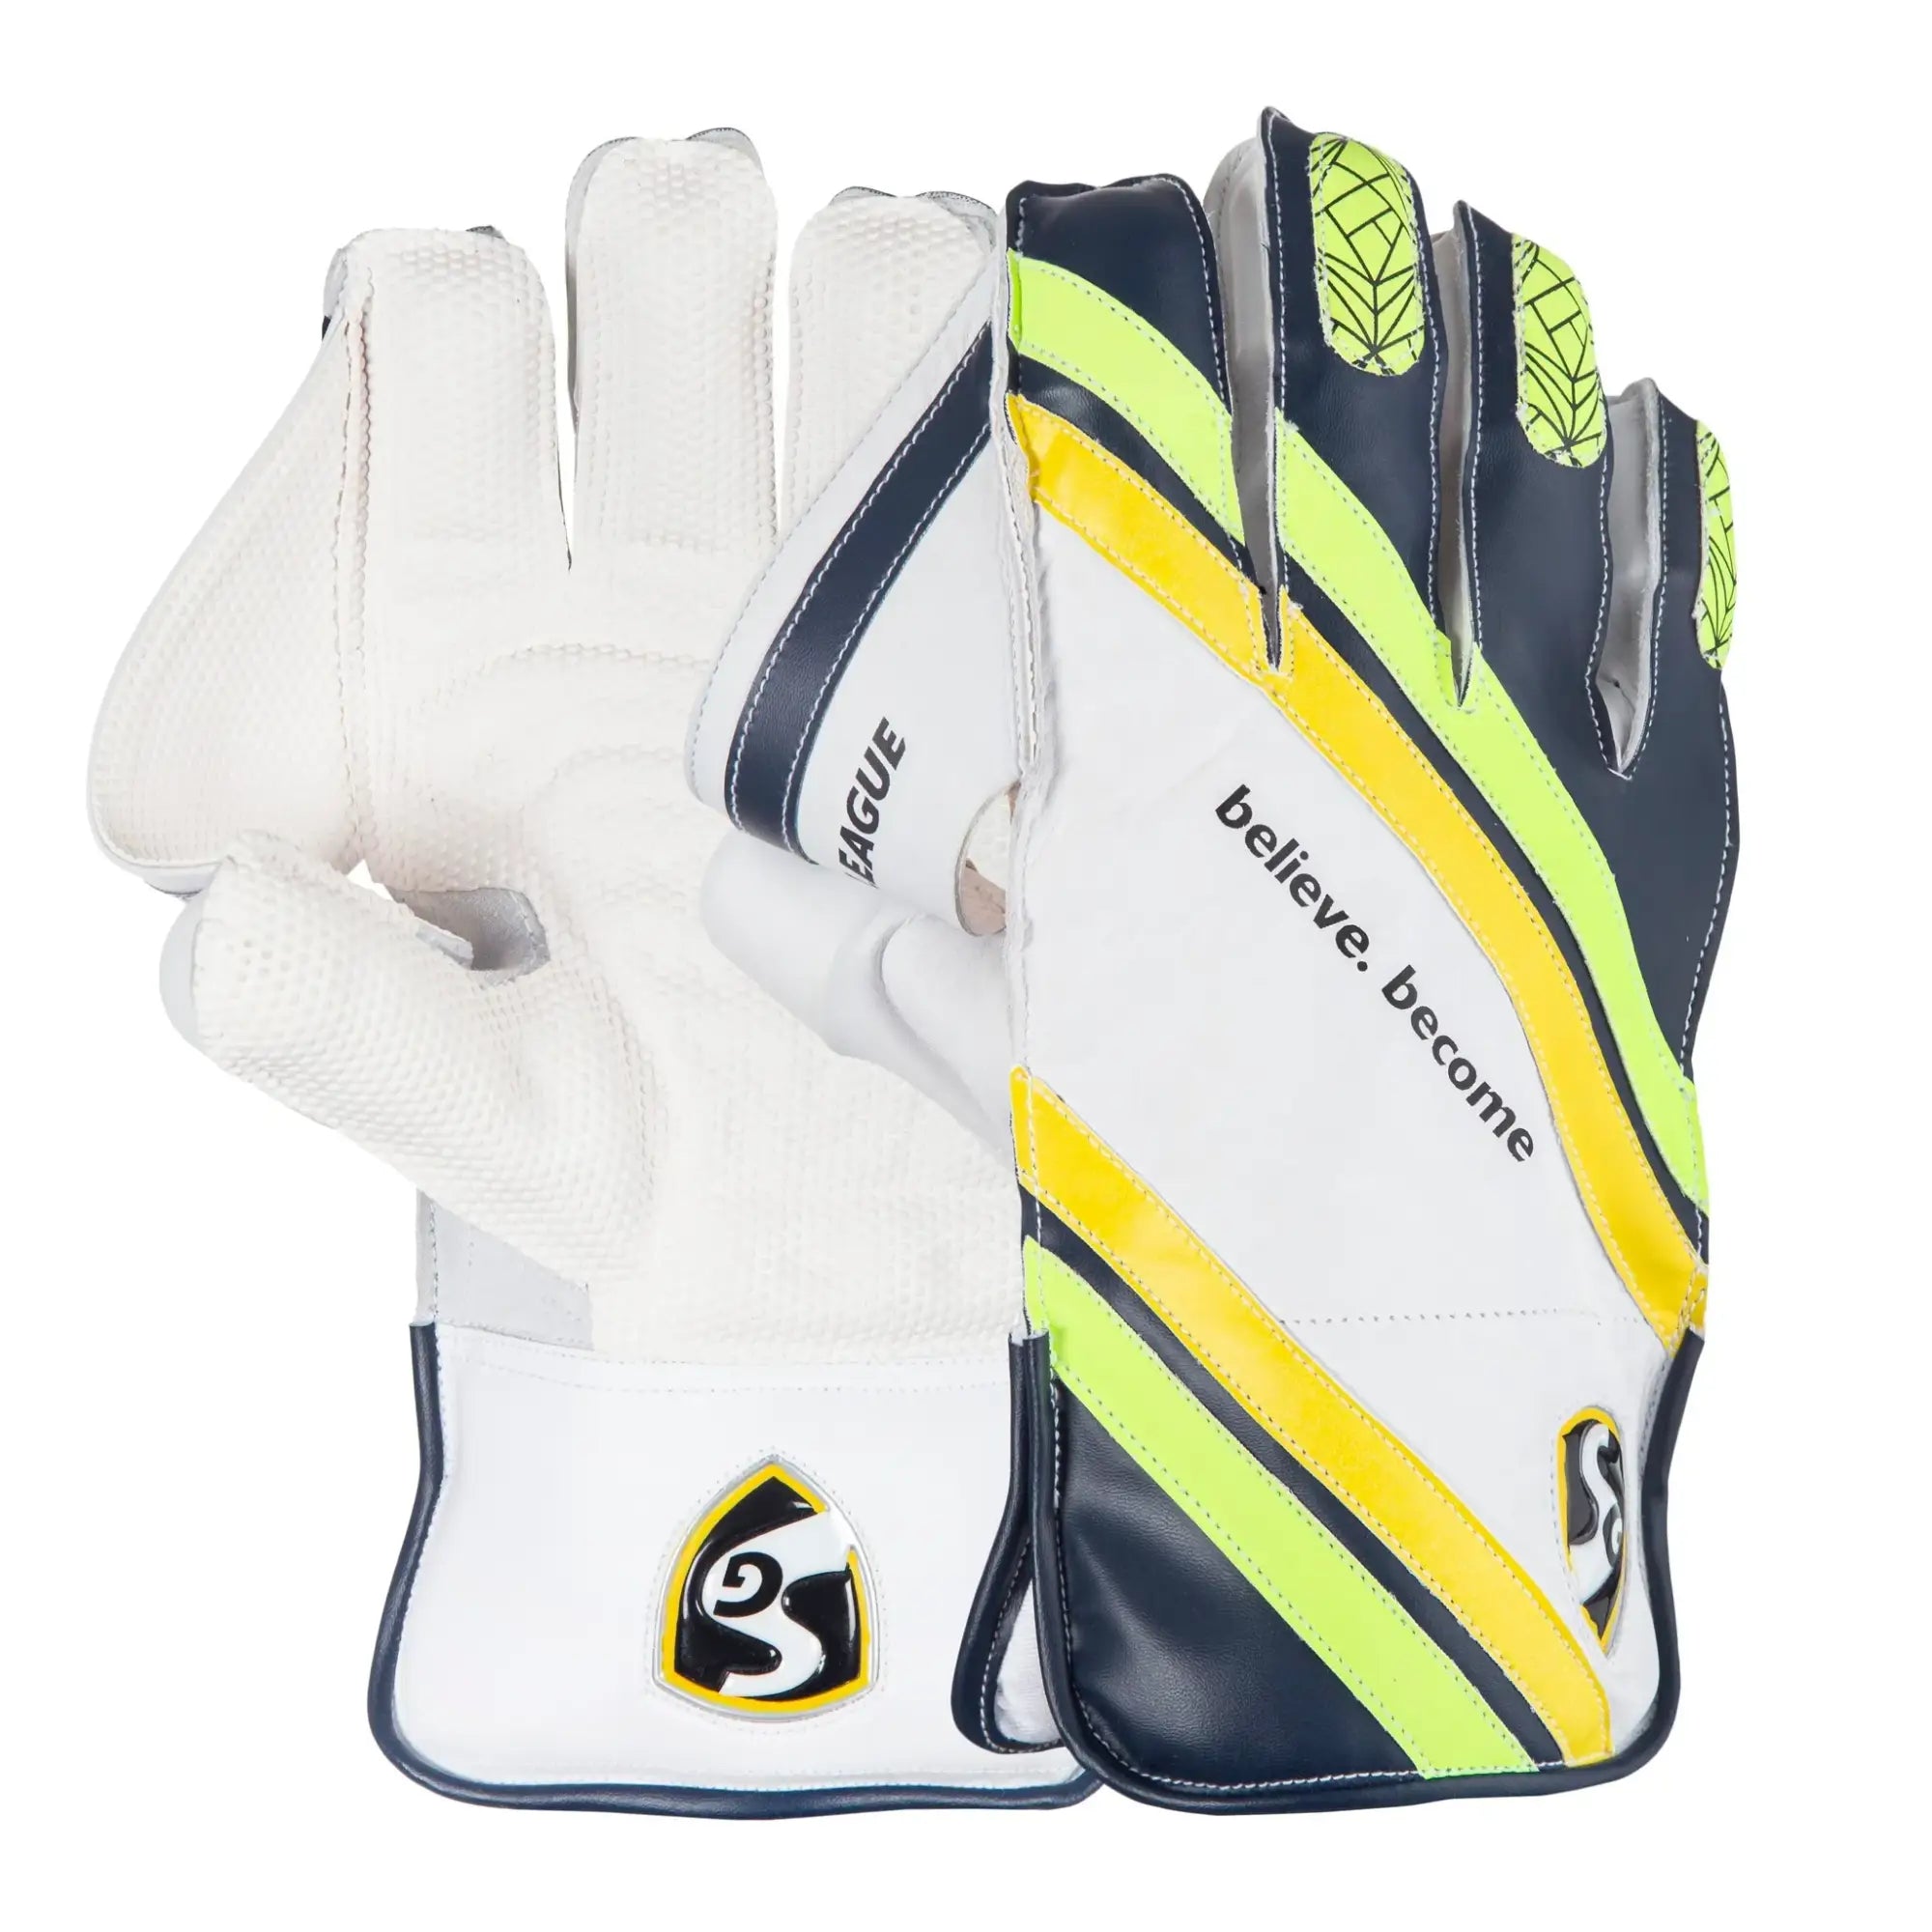 SG League Cricket Gloves Wicket Keeping - Adult - GLOVE - WICKET KEEPING